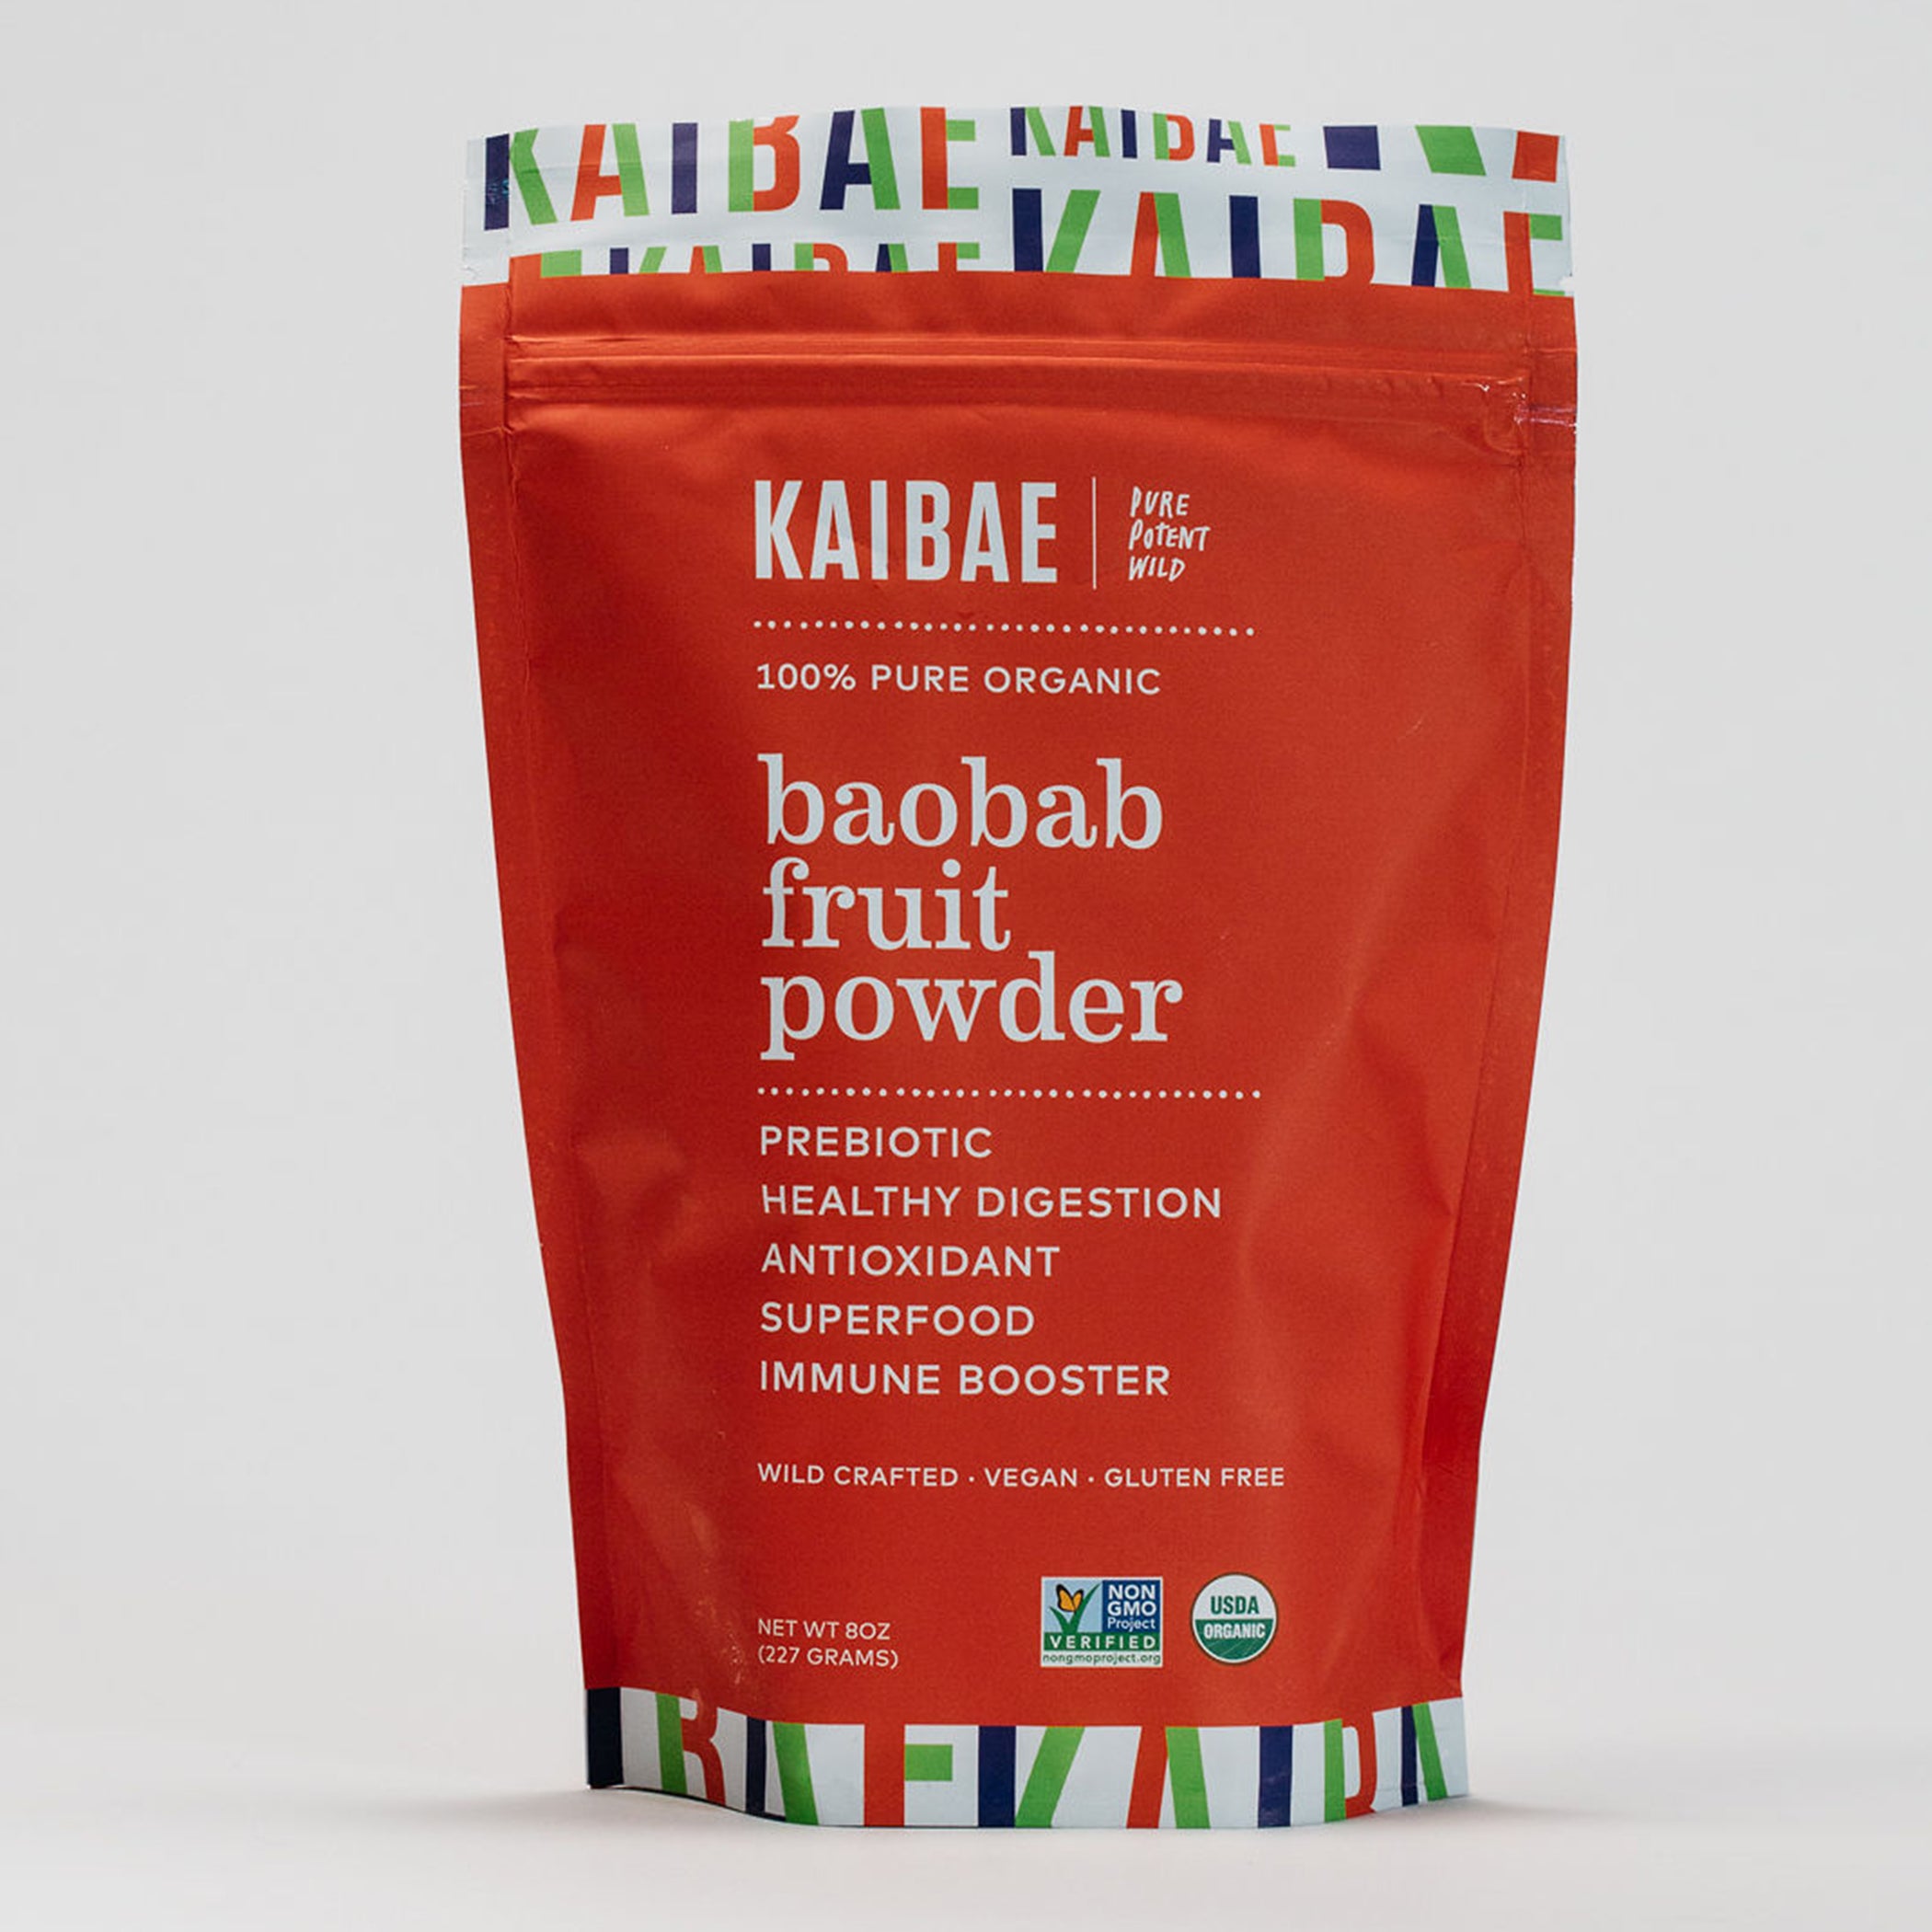 Baobab super fiber by KAIBAE in a red standup pouch , Baobab ris a superfood ich in prebiotic fiber, antioxidants, polyphenols , vitamin C . calcium, magnesium and potassium.